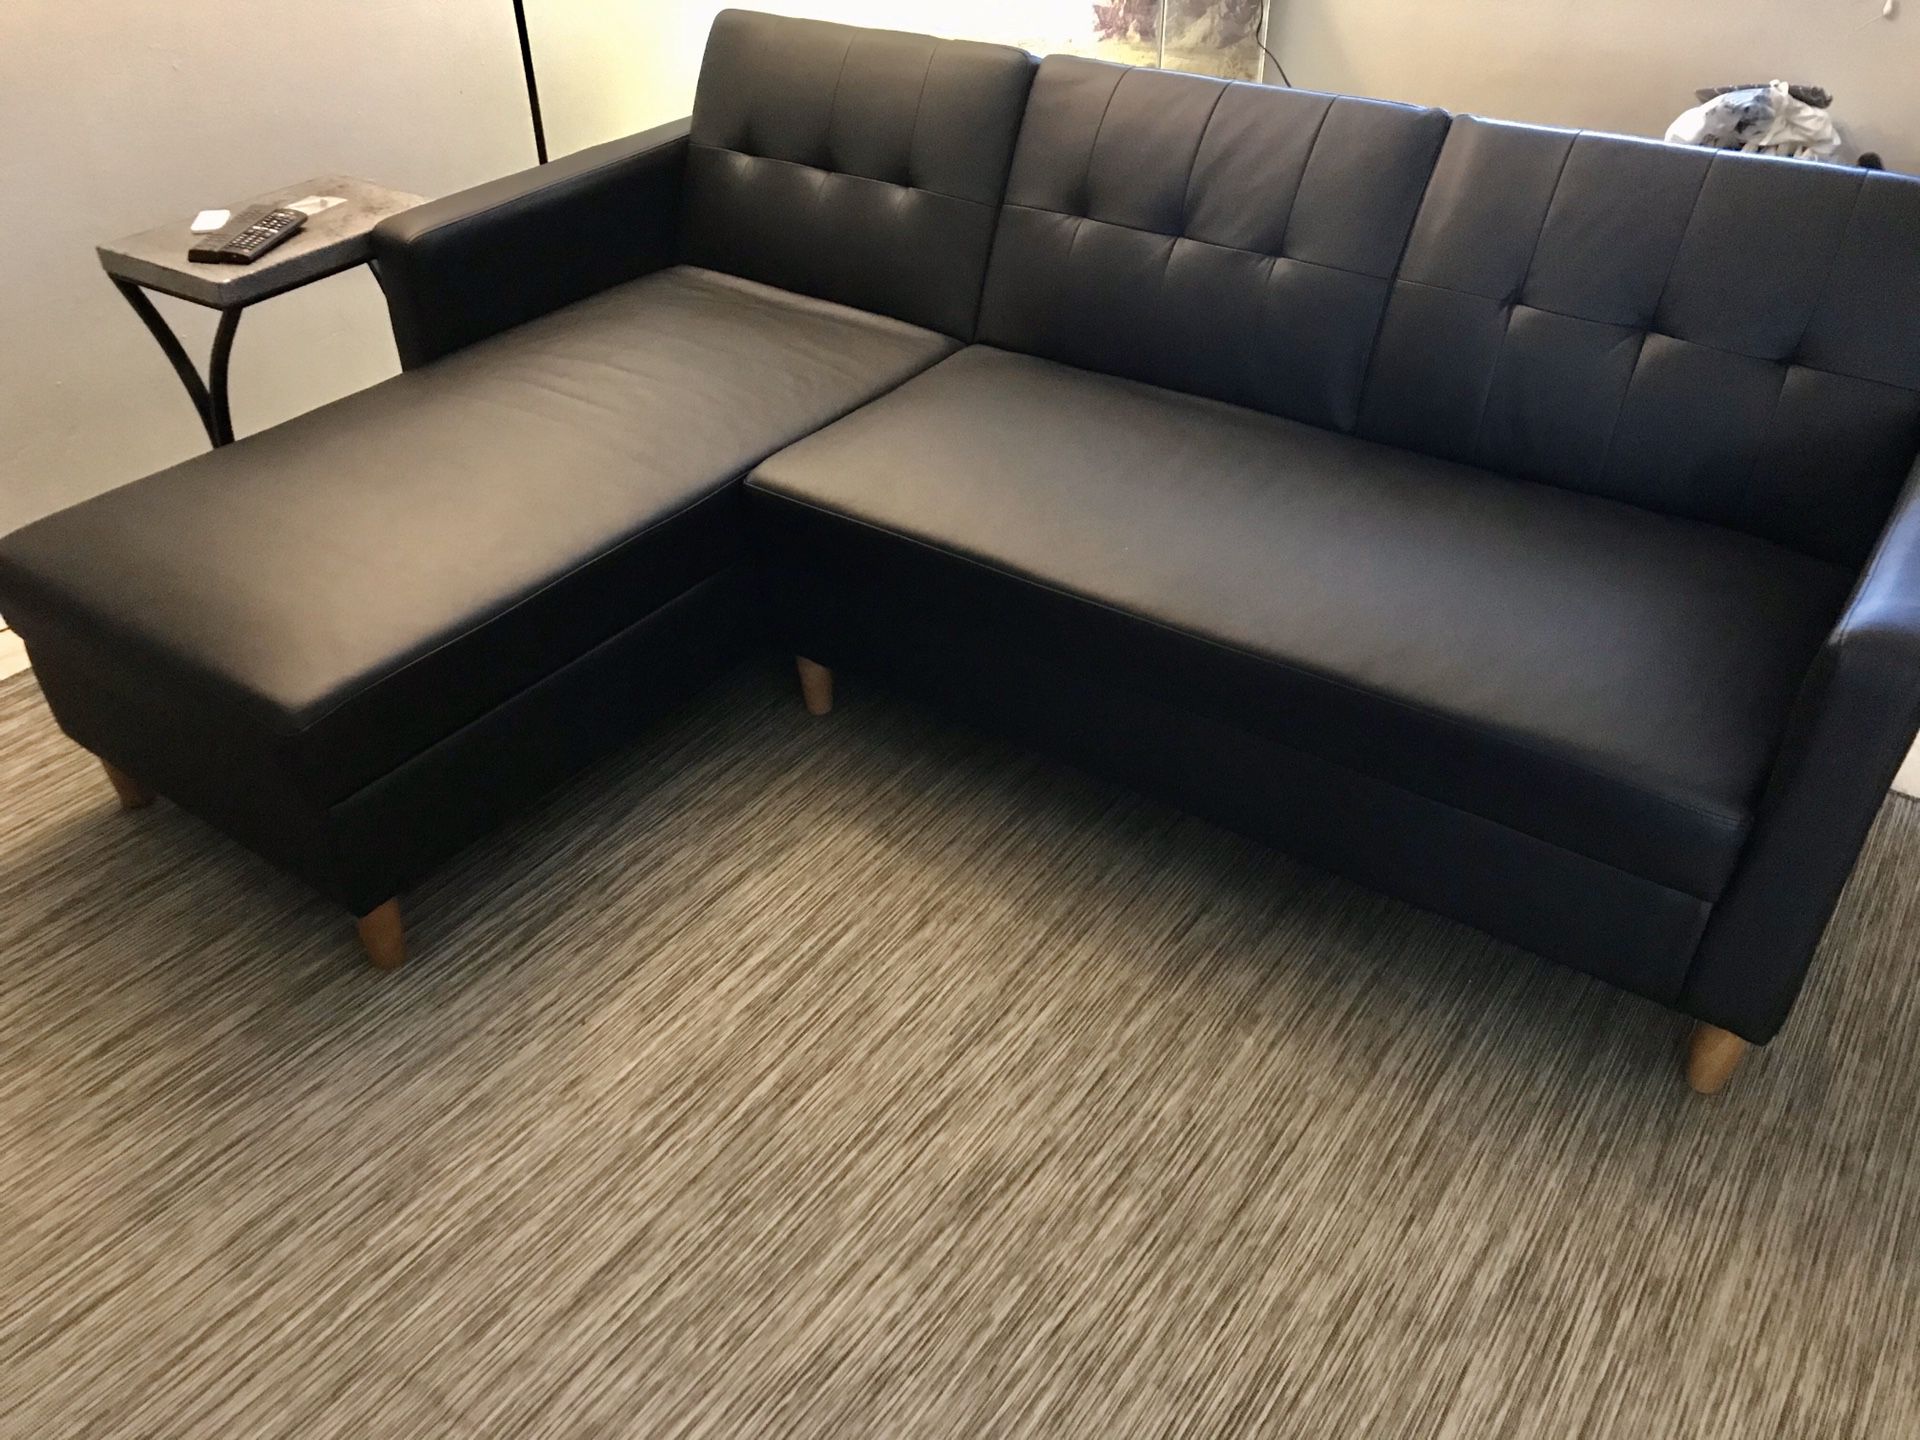 Black Sectional Couch/Sleeper Sofa